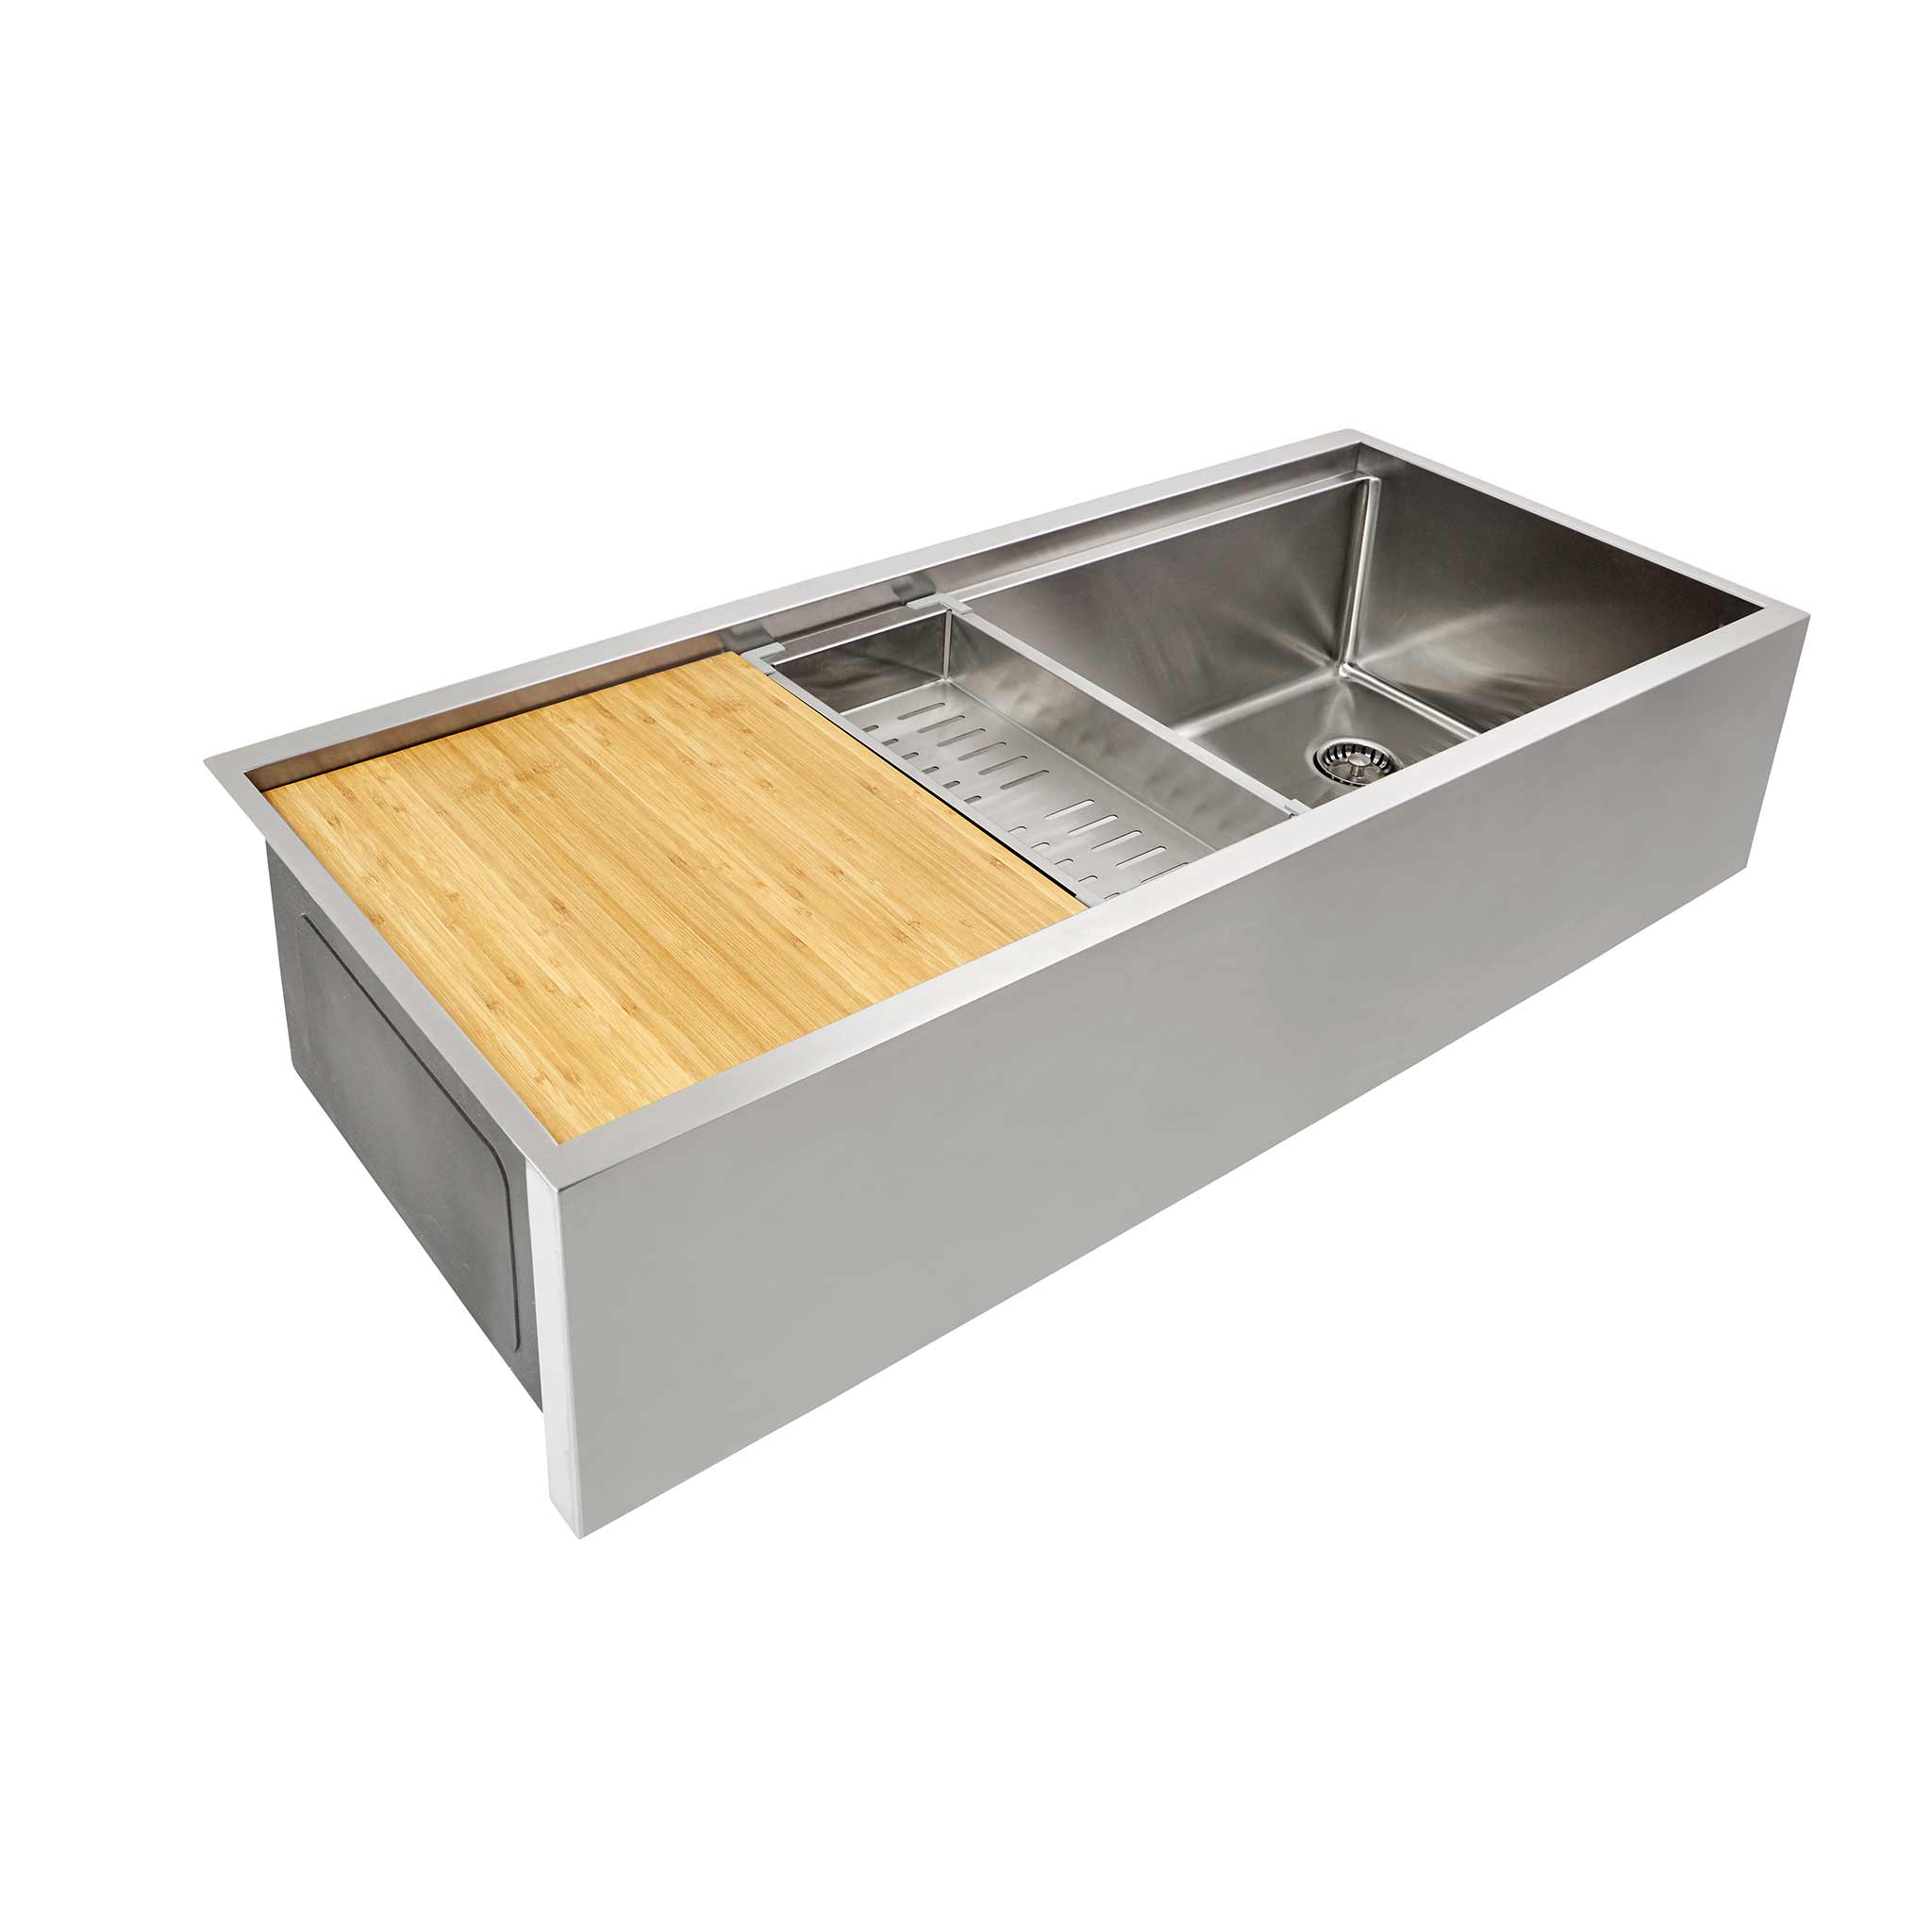 46 inch double bowl apron front workstation sink